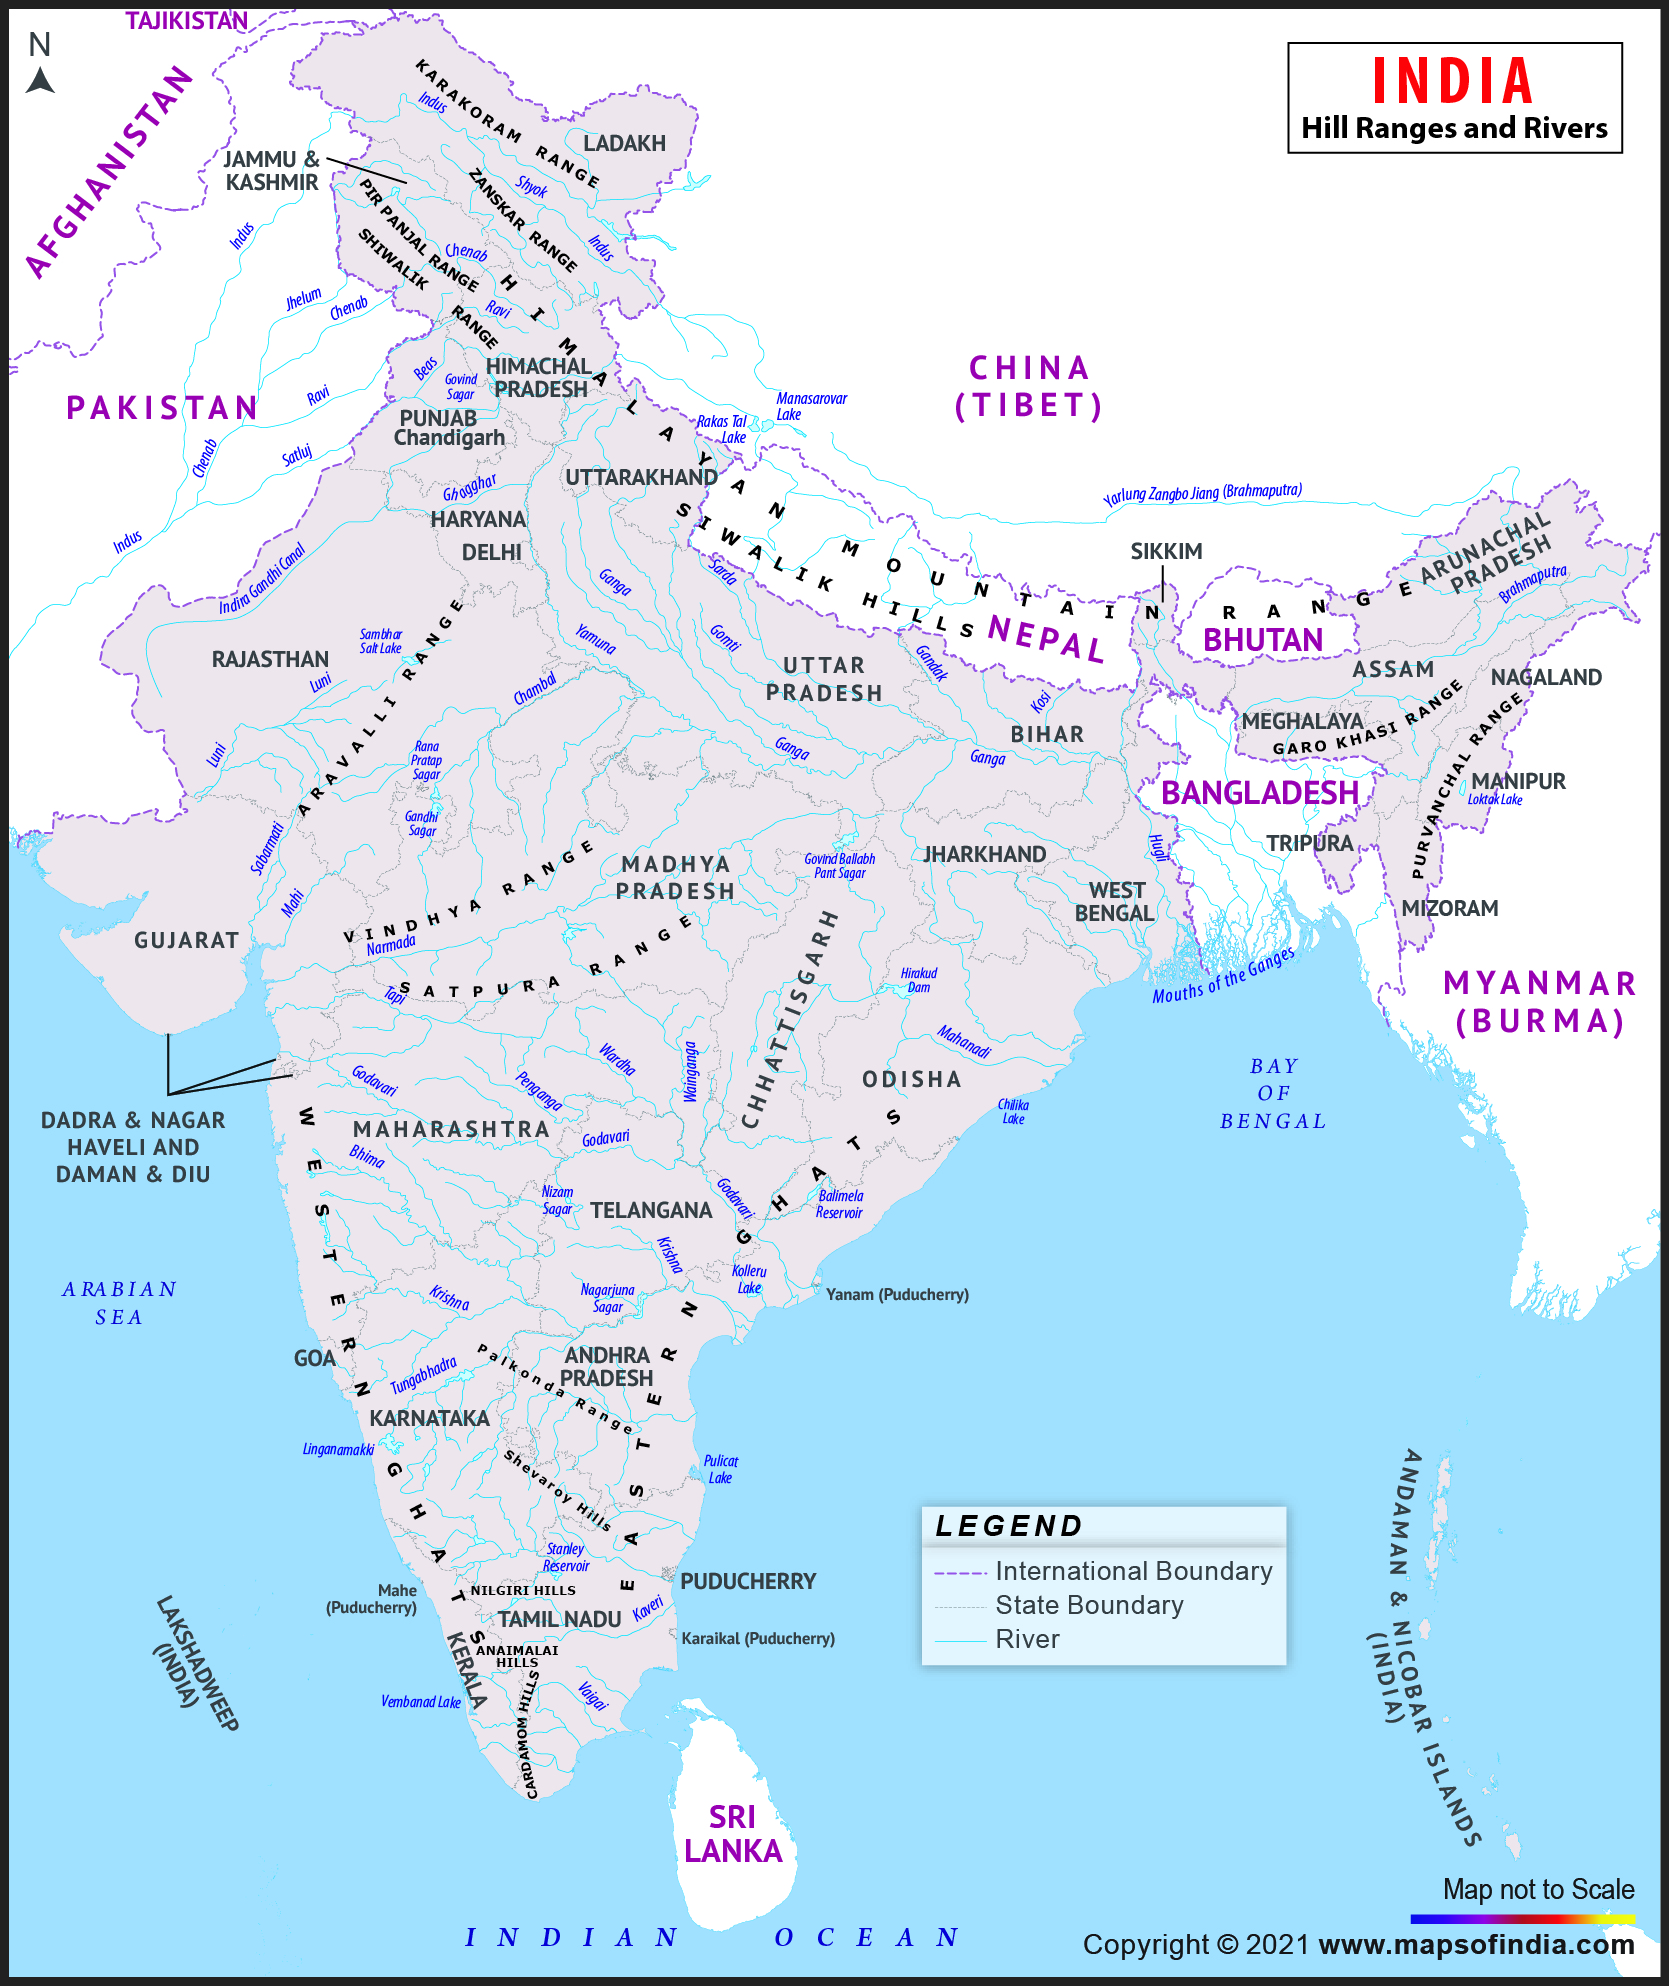 India Hill ranges and rivers Map